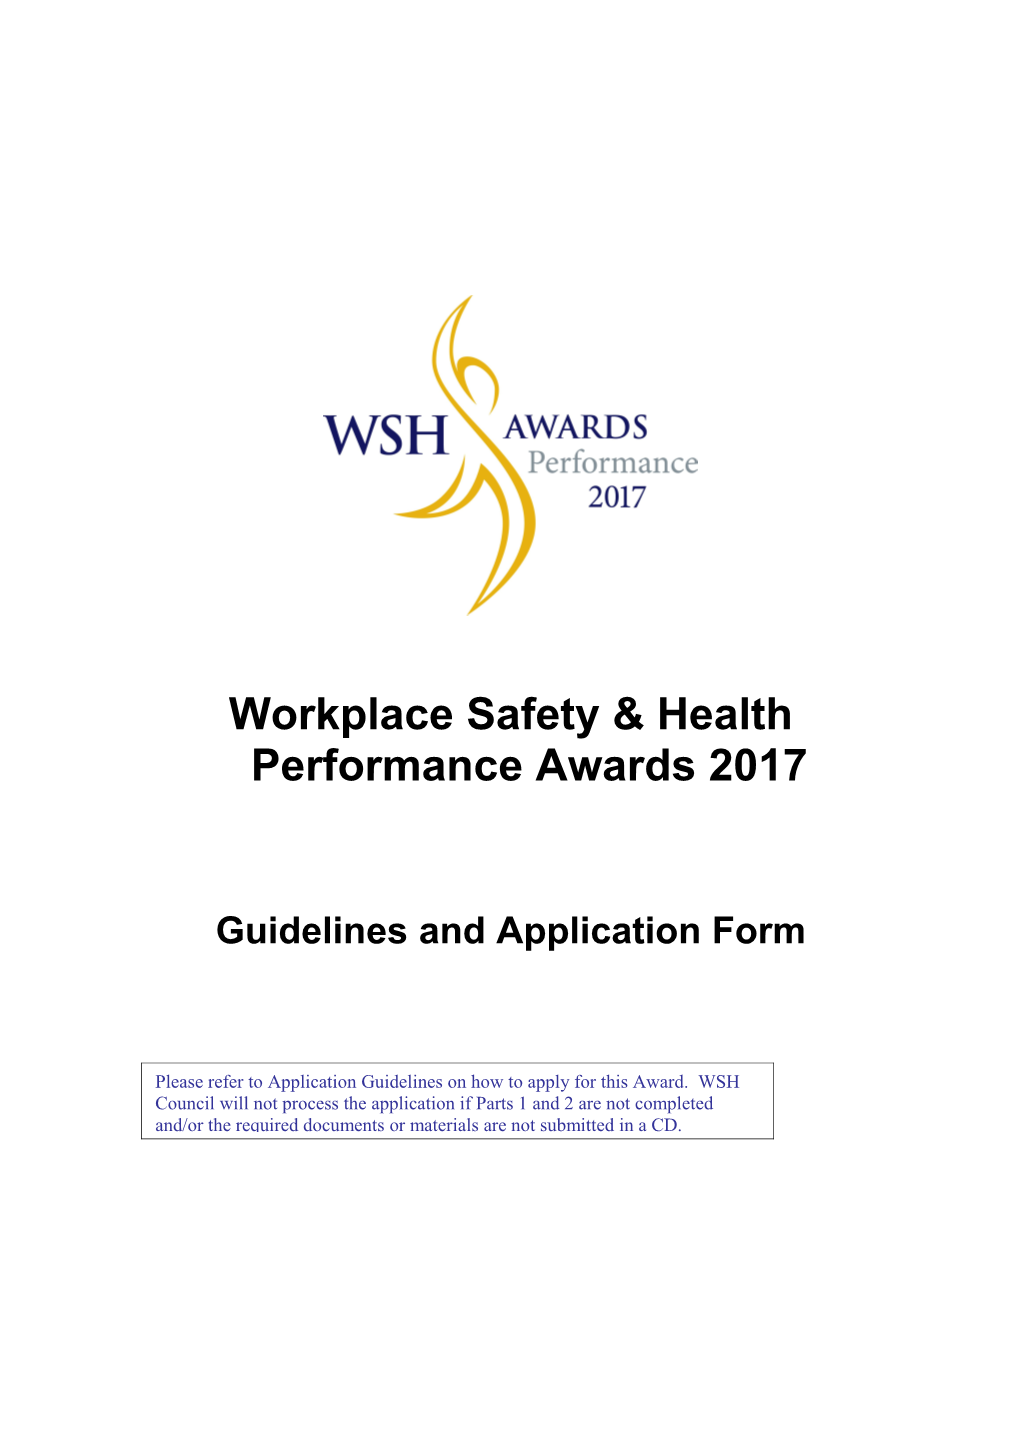 Workplace Safety & Health Performance Awards 2017